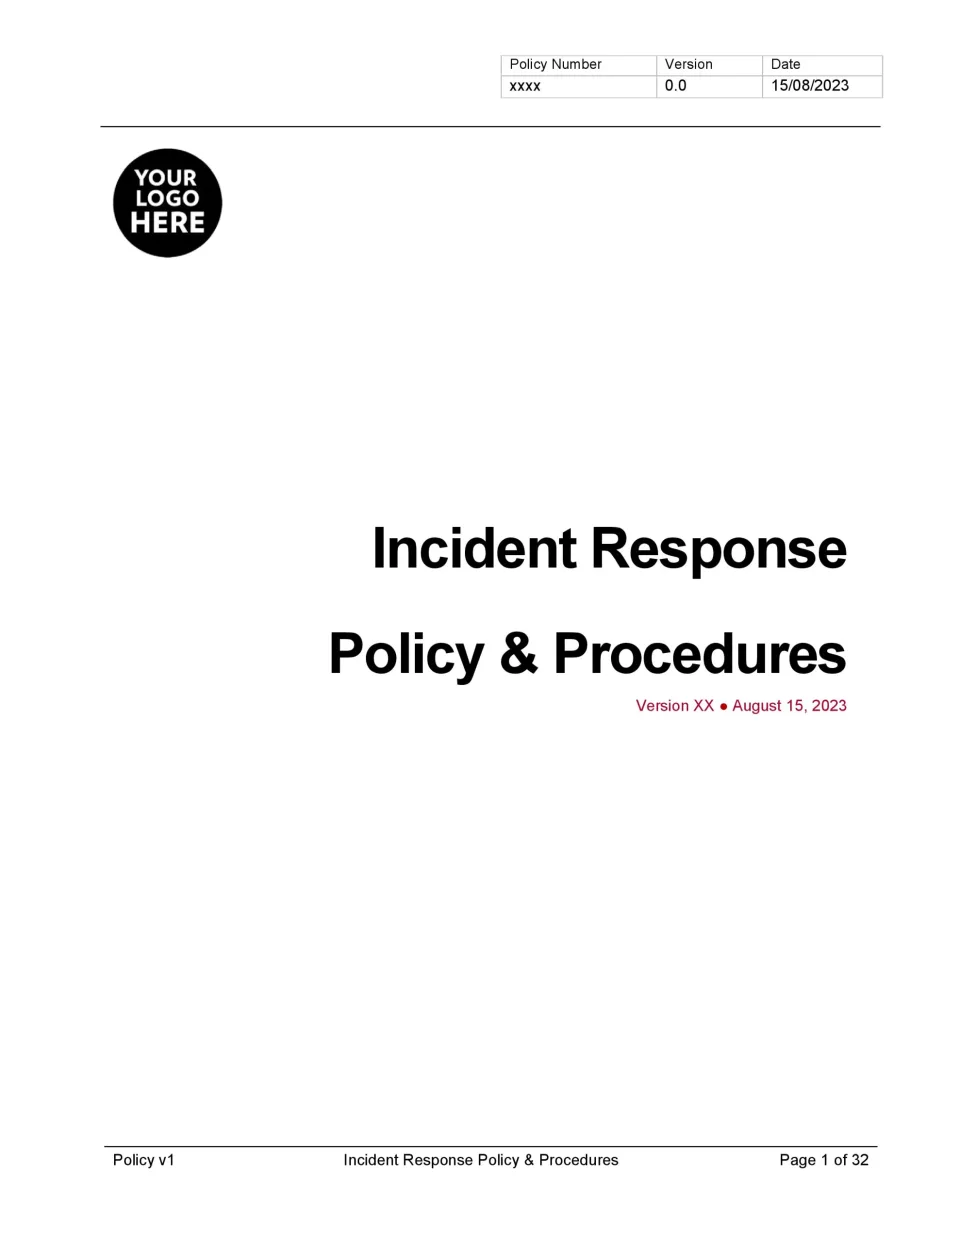 Incident Response Policy Template